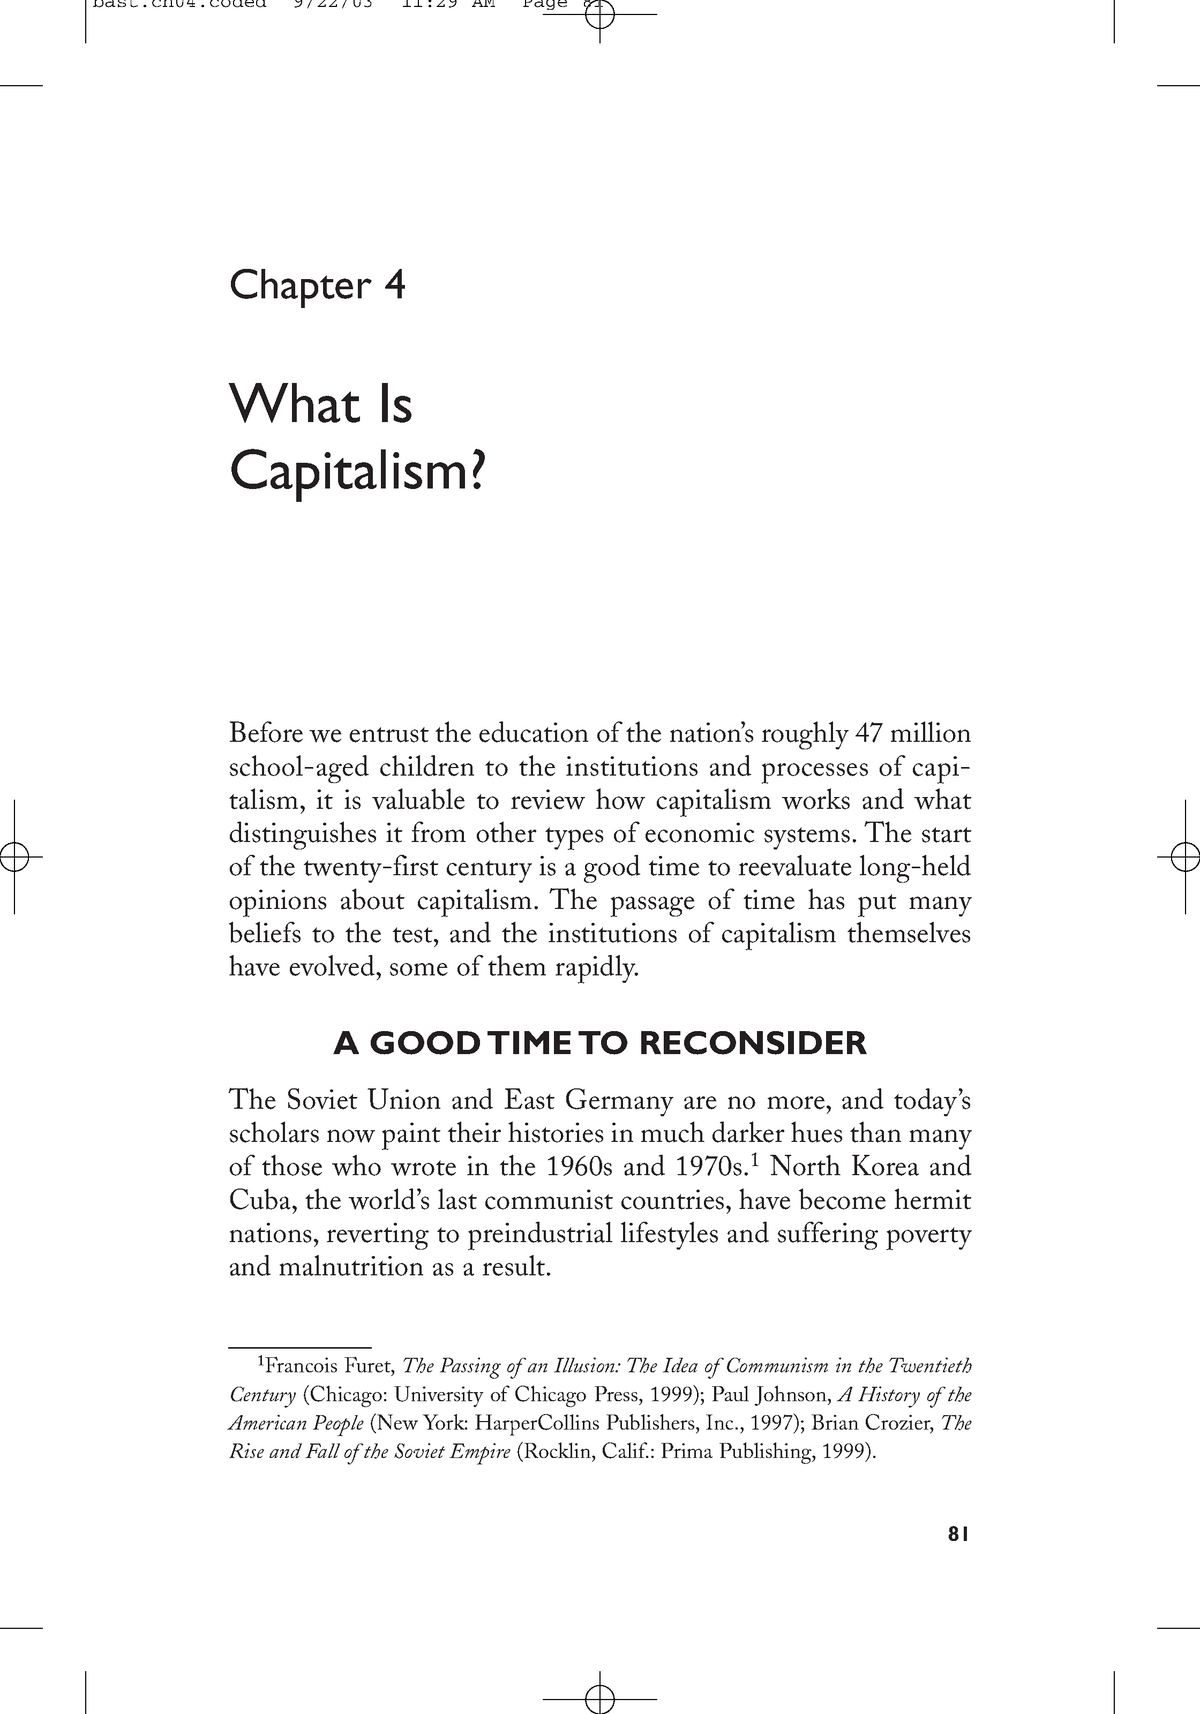 thesis questions about capitalism